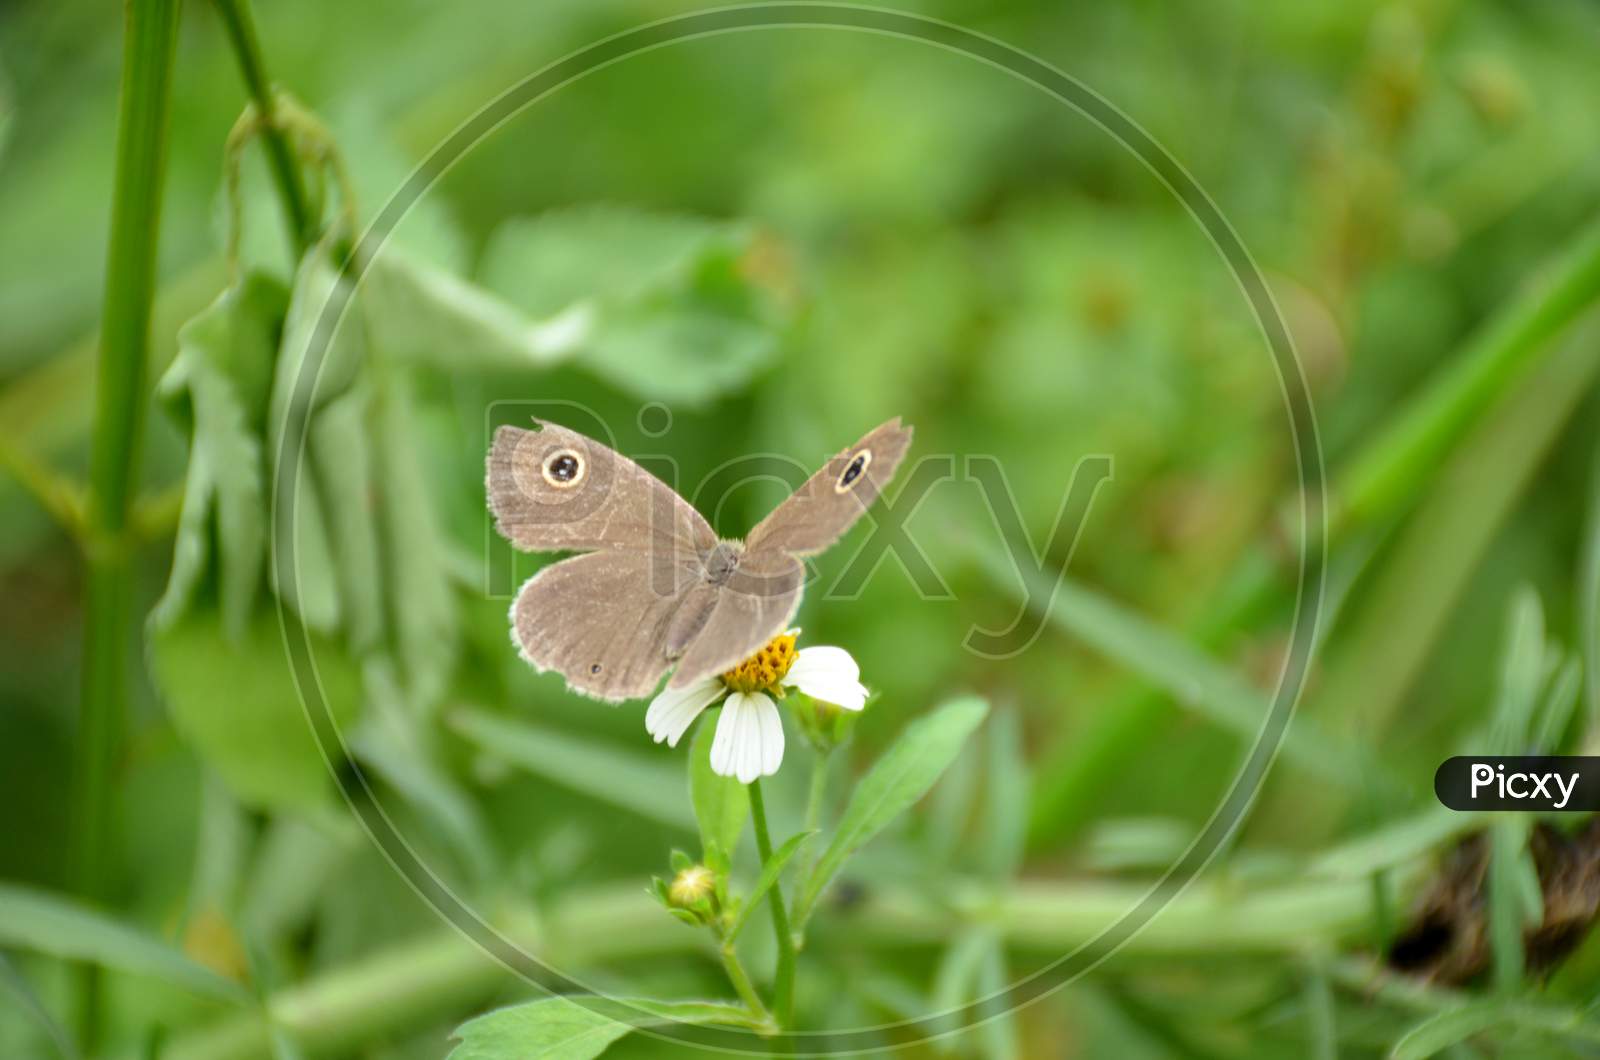 The Small Beautiful Brown Butterfly Hold On White Flower With Plant.